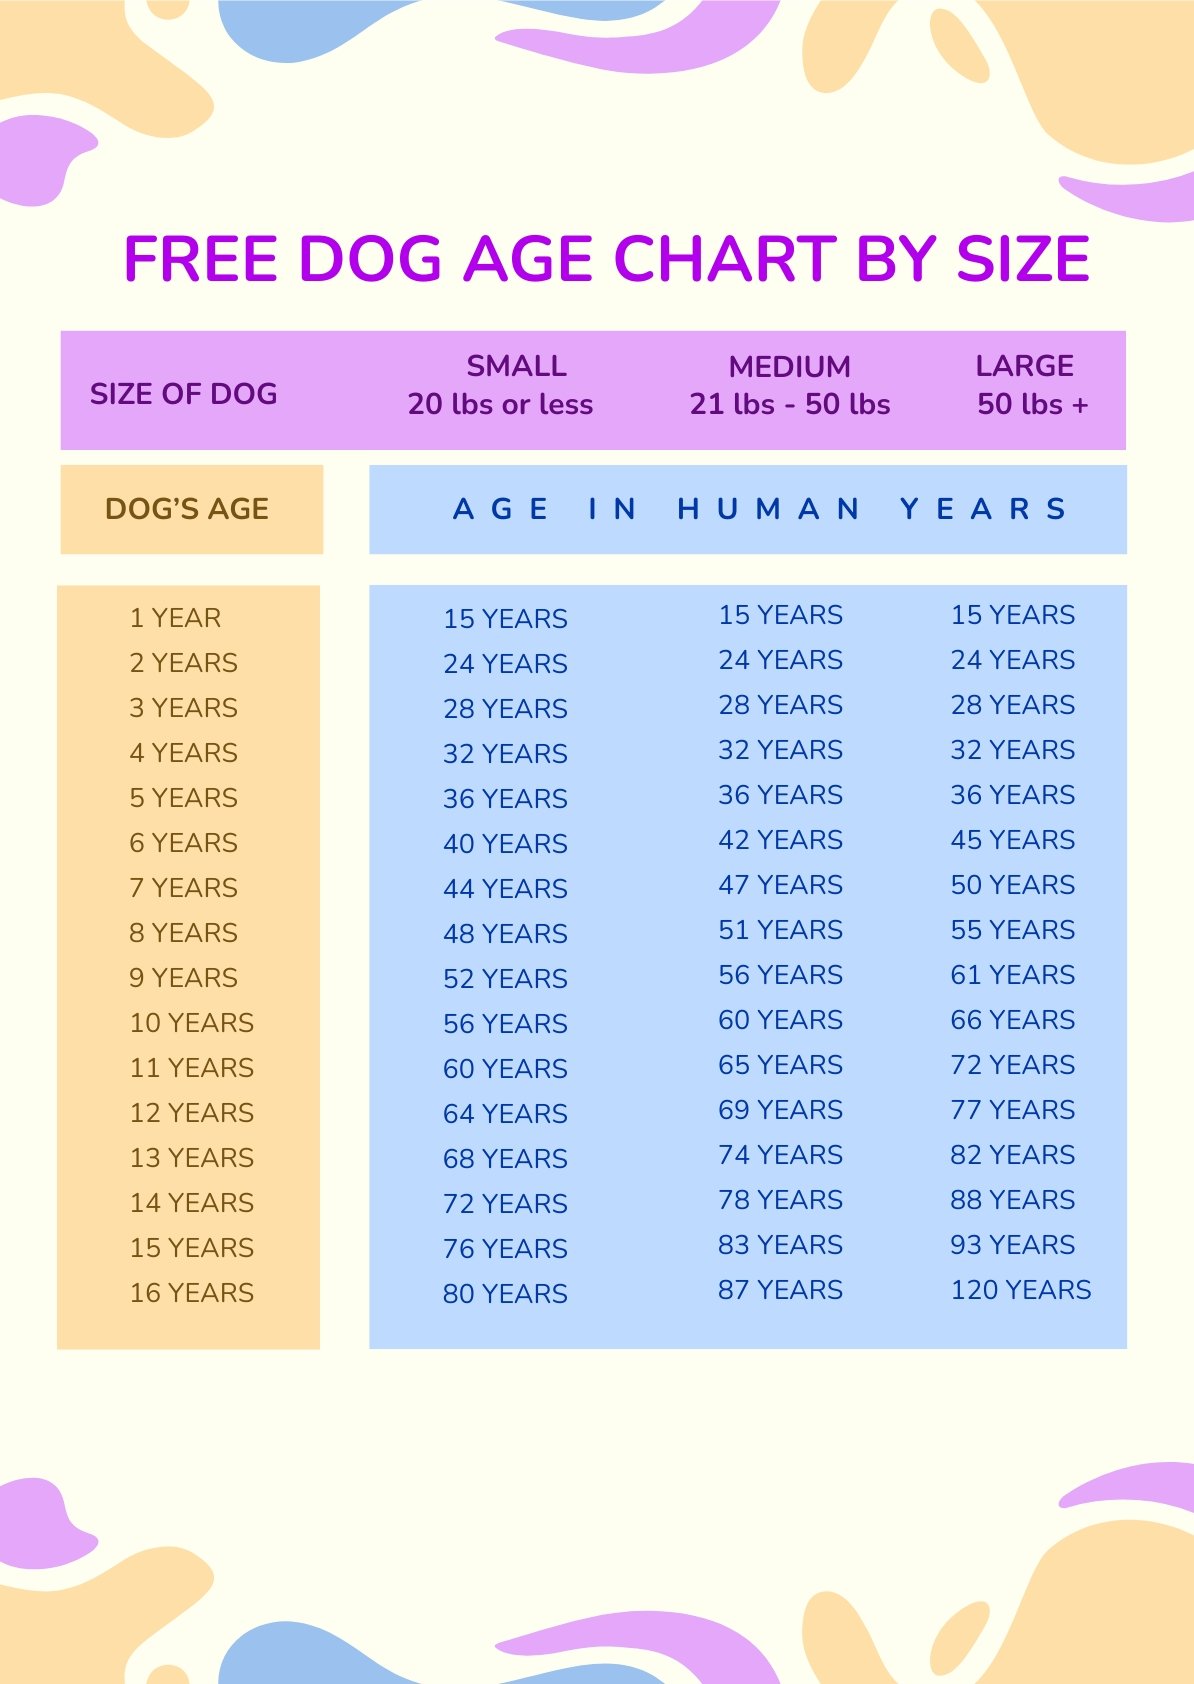 dog-age-chart-by-size-in-psd-download-template